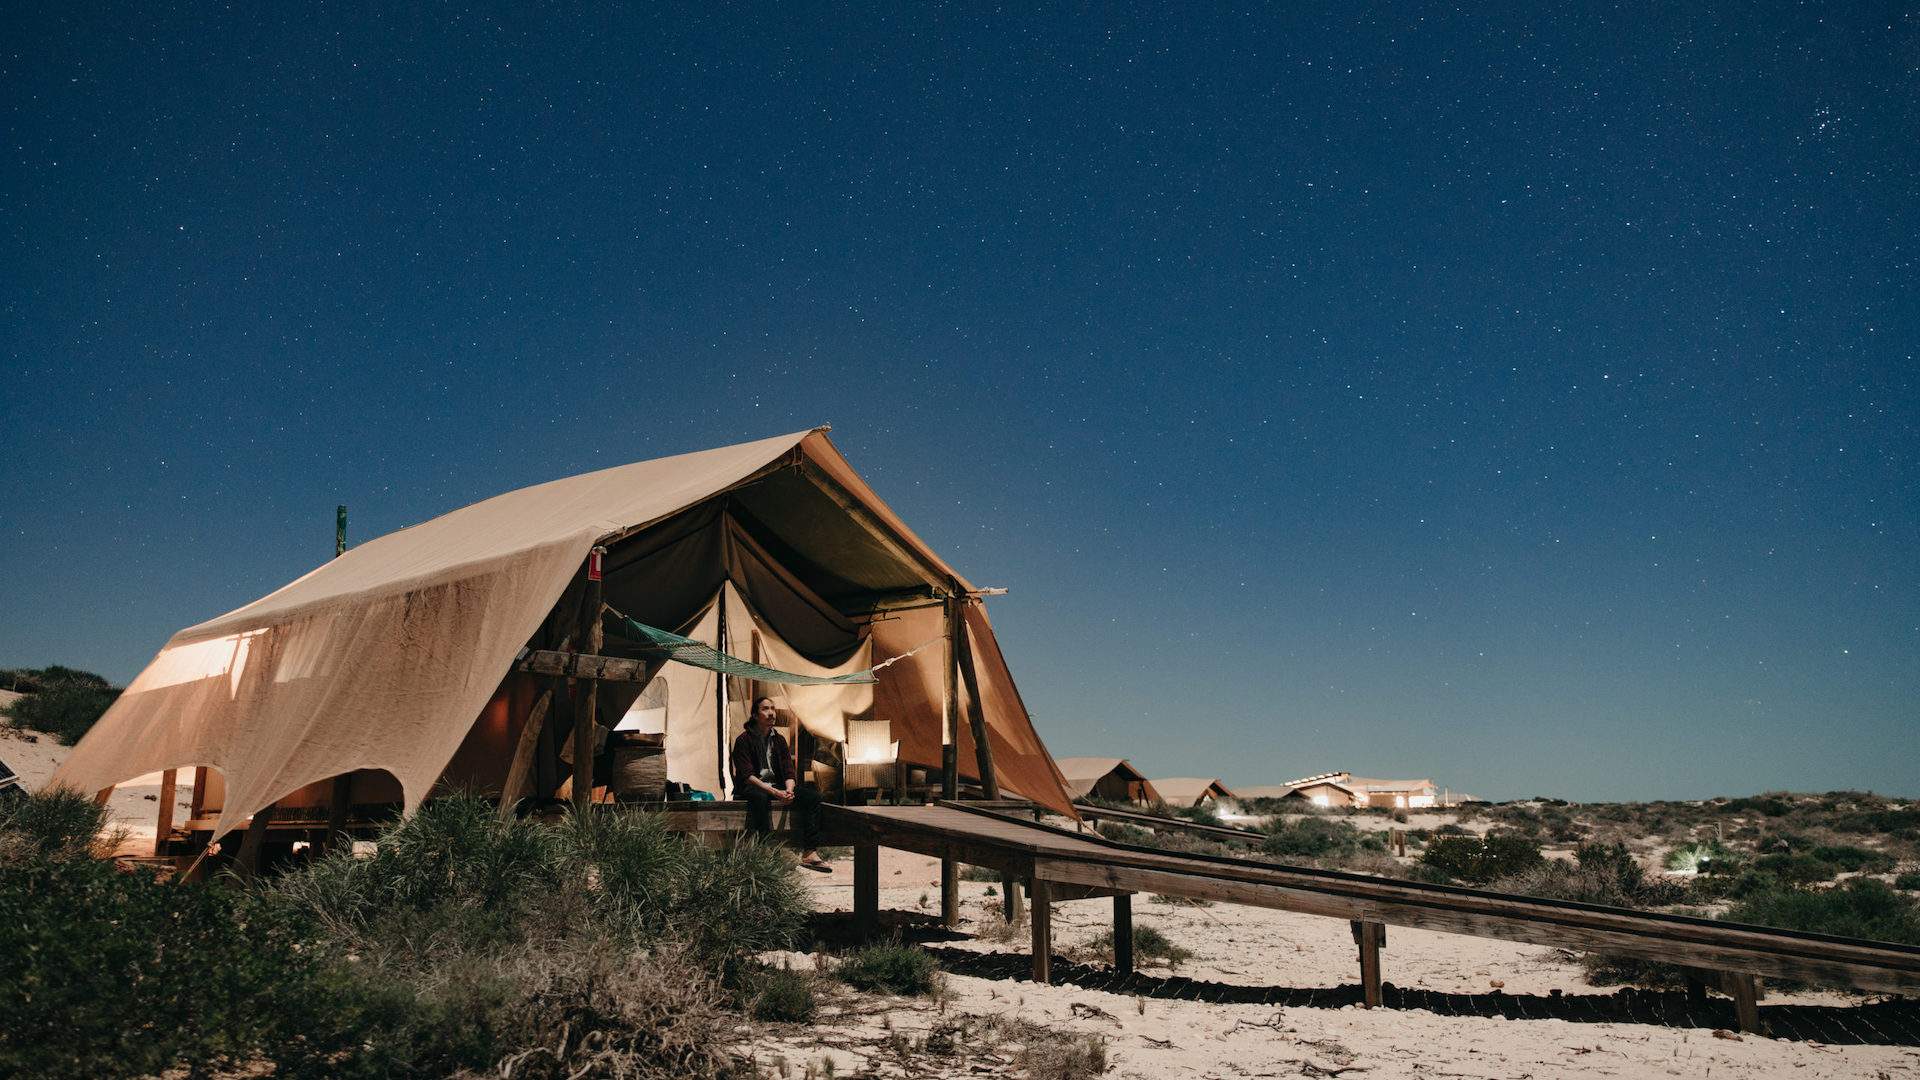 SAL SALIS, WESTERN AUSTRALIA - one of the best places to go glamping in Australia.